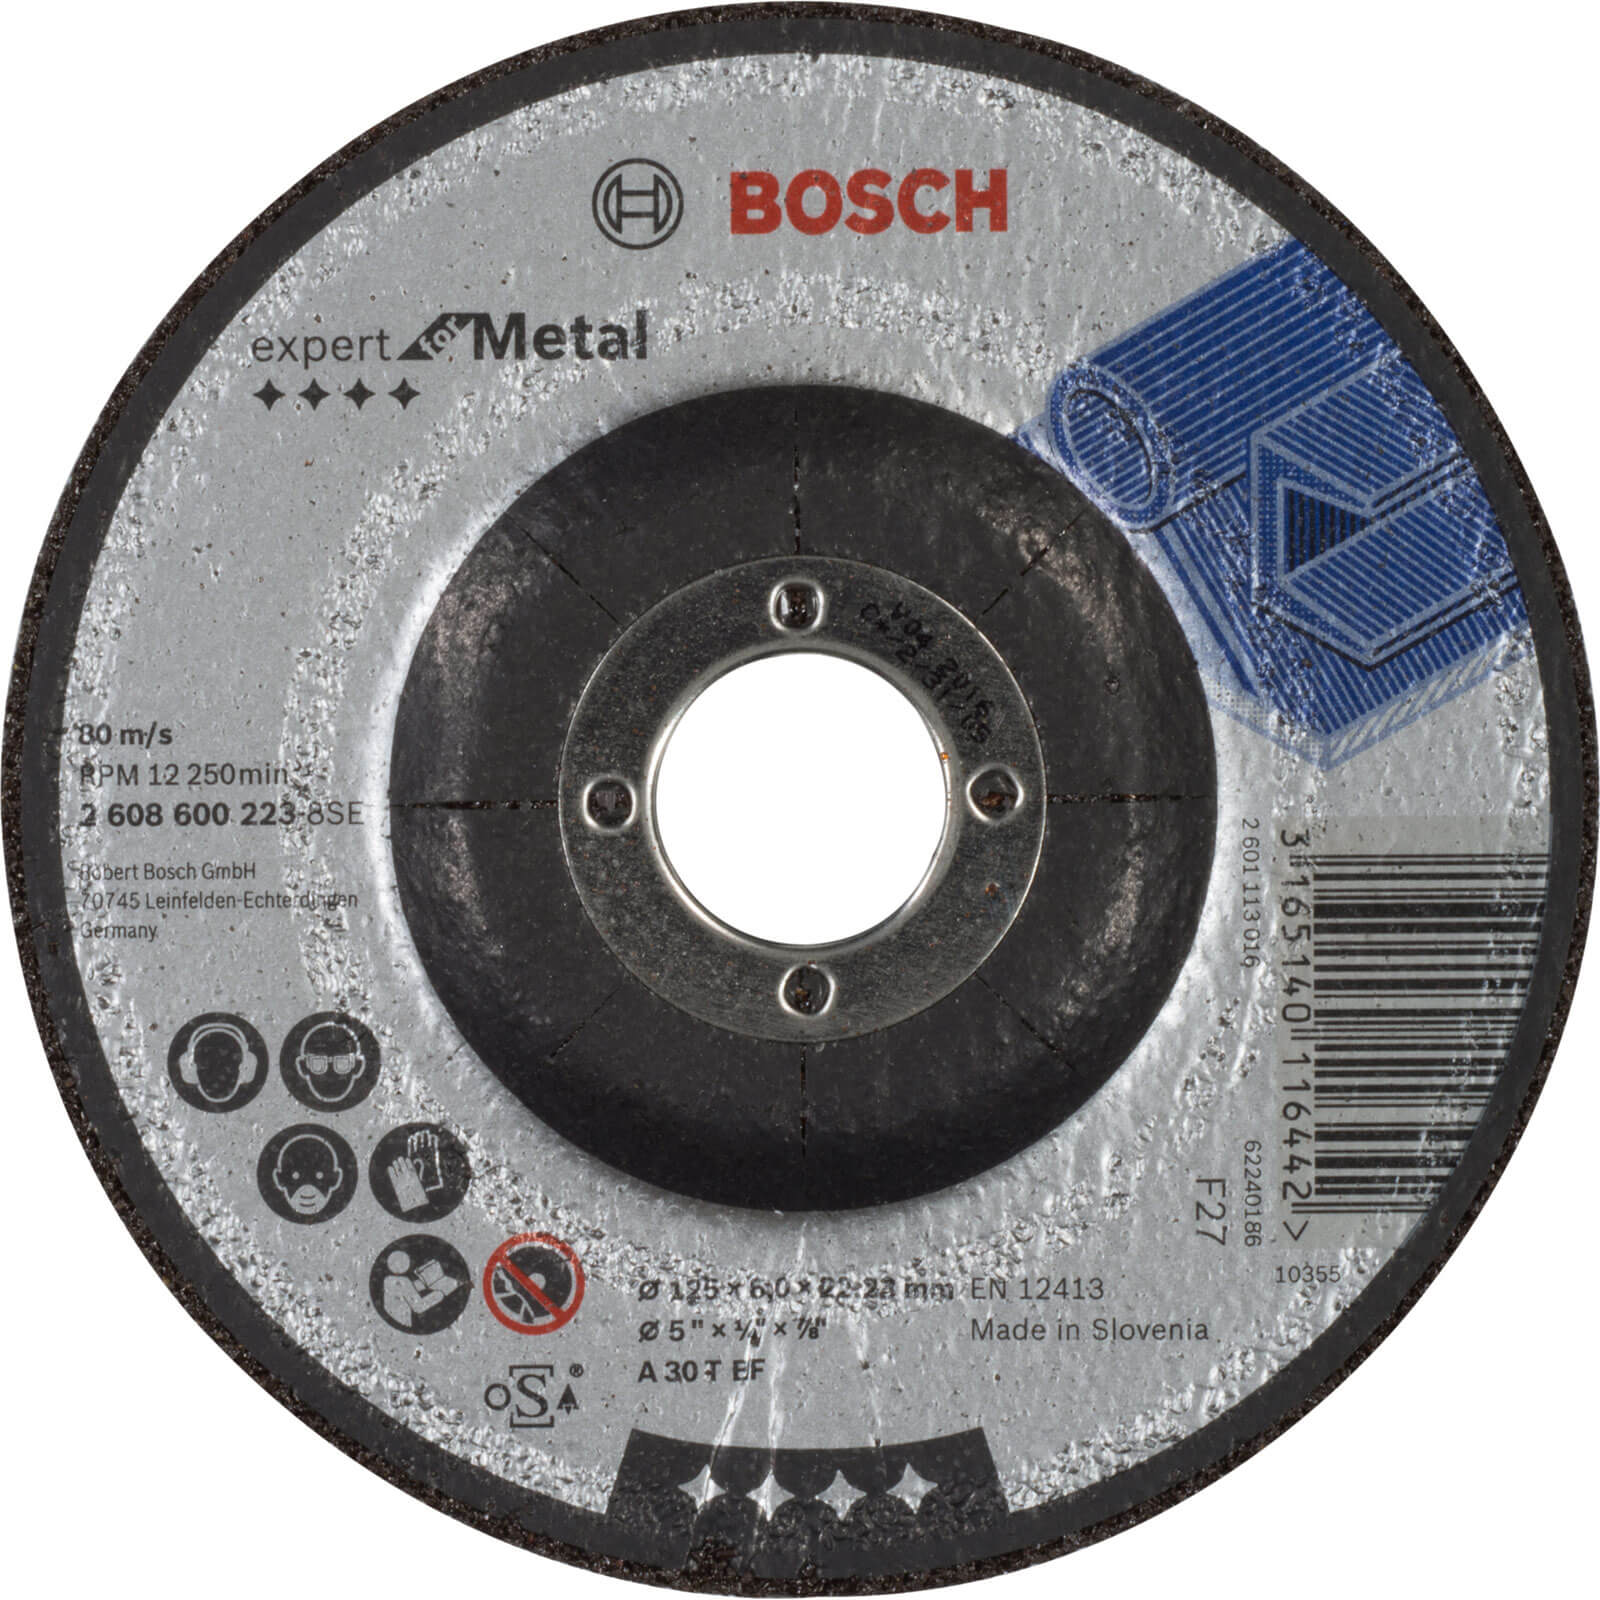 Photos - Cutting Disc Bosch A30T BF Drepressed Centre Metal Grinding Disc 125mm 2608600223 